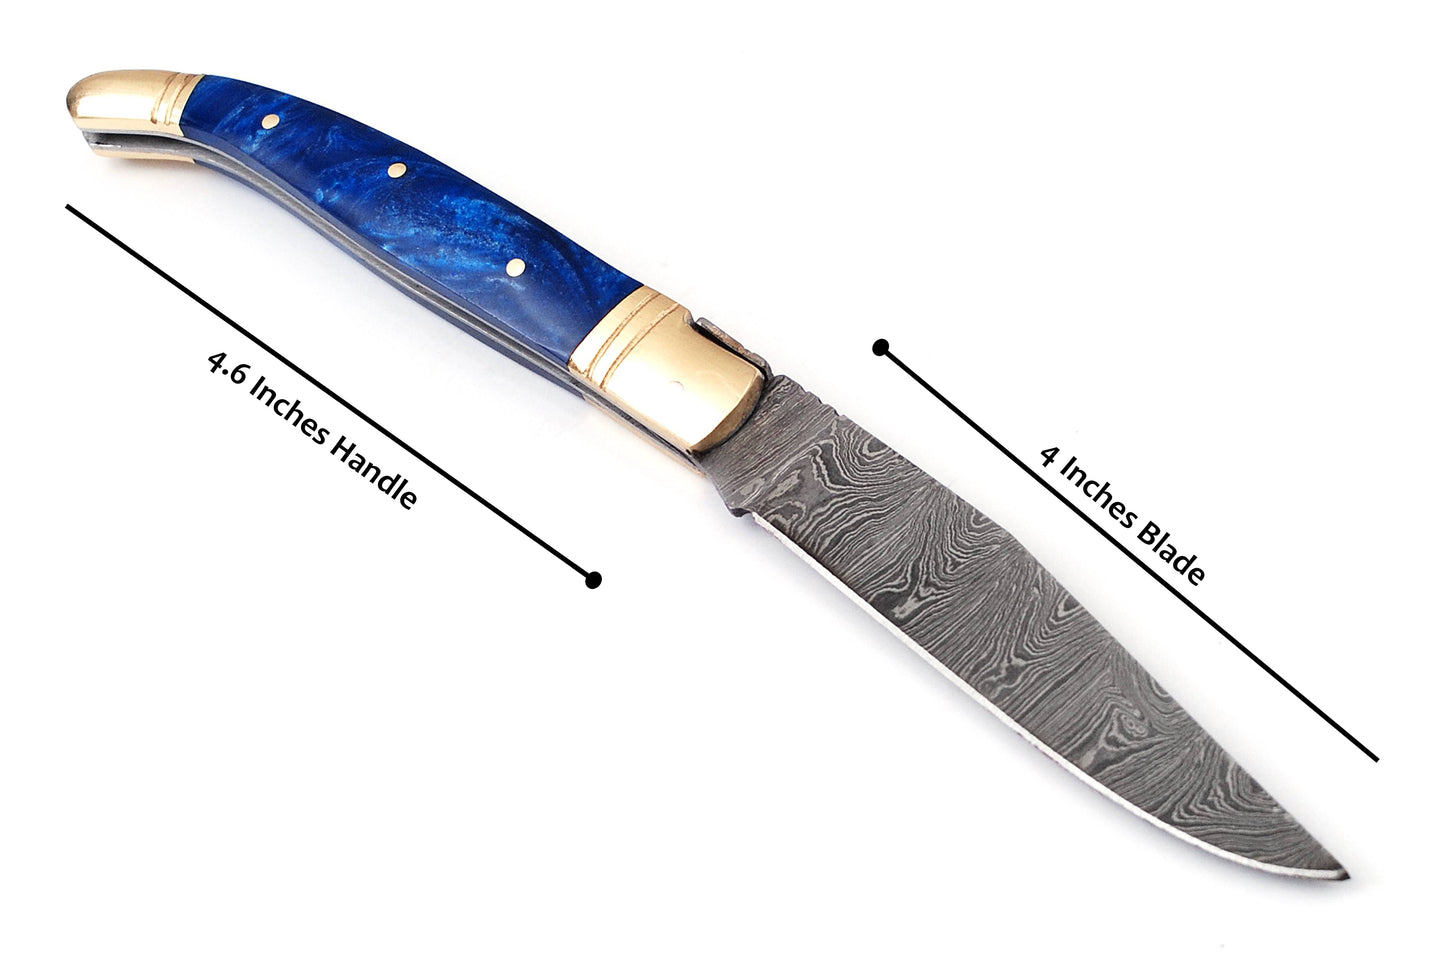 Laguiole Folding Damascus steel knife, 8.6" Long with 4.1" hand forged custom twist pattern Blade. Off white unshrinkable Raisen scale with brass bolster and Pommel. Cow hide leather sheath included (White Raisen)